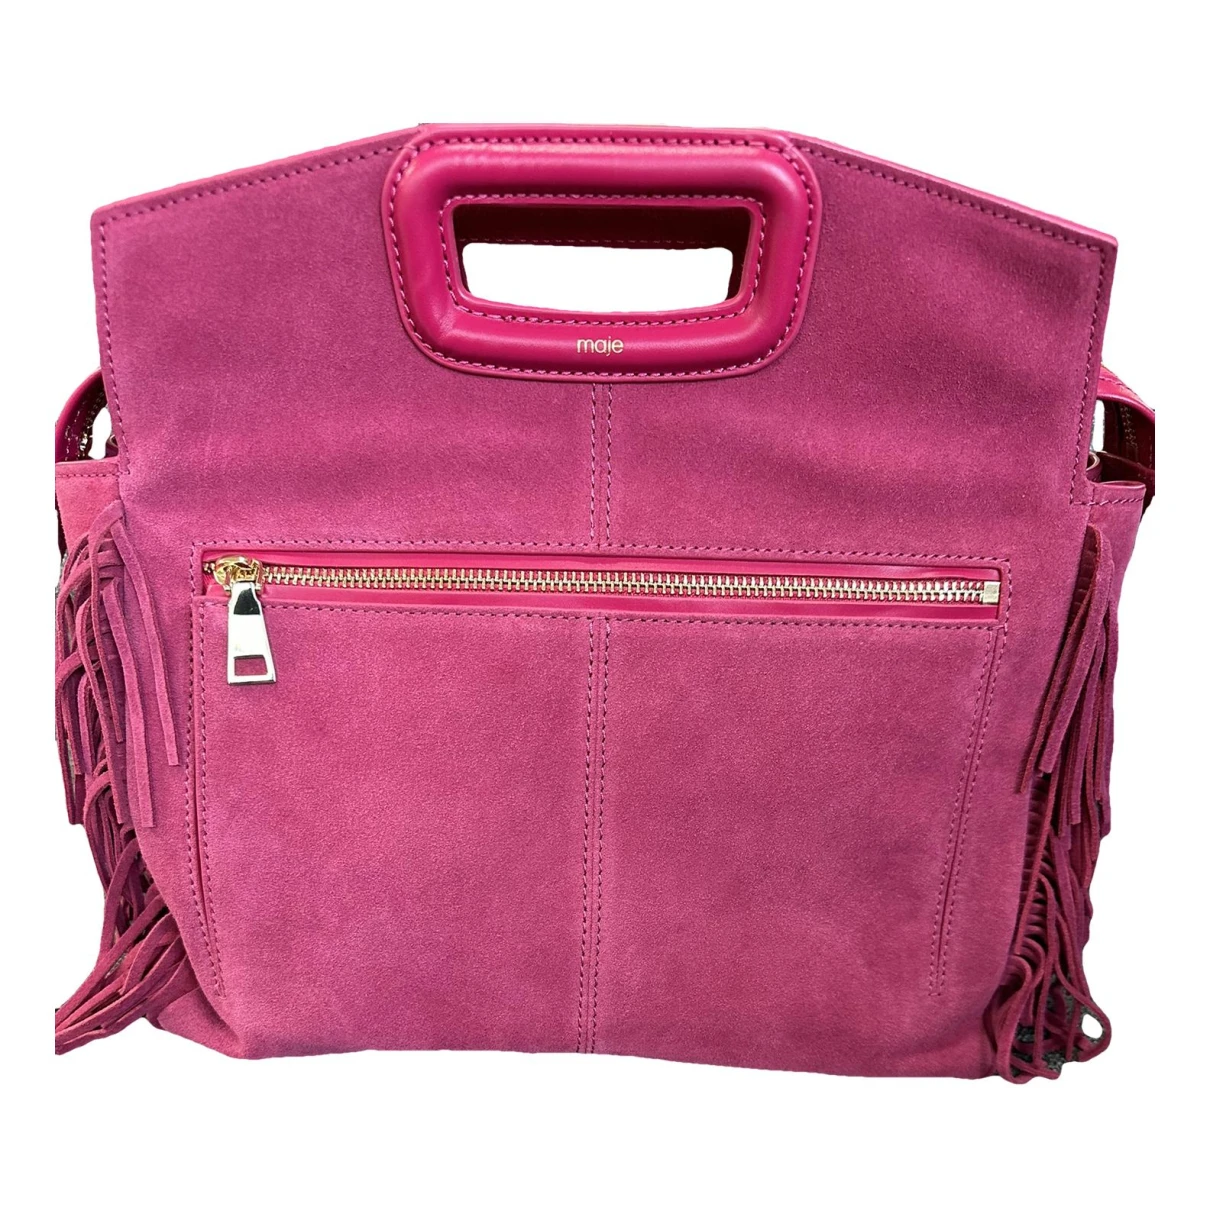 Pre-owned Maje Sac M Leather Handbag In Pink